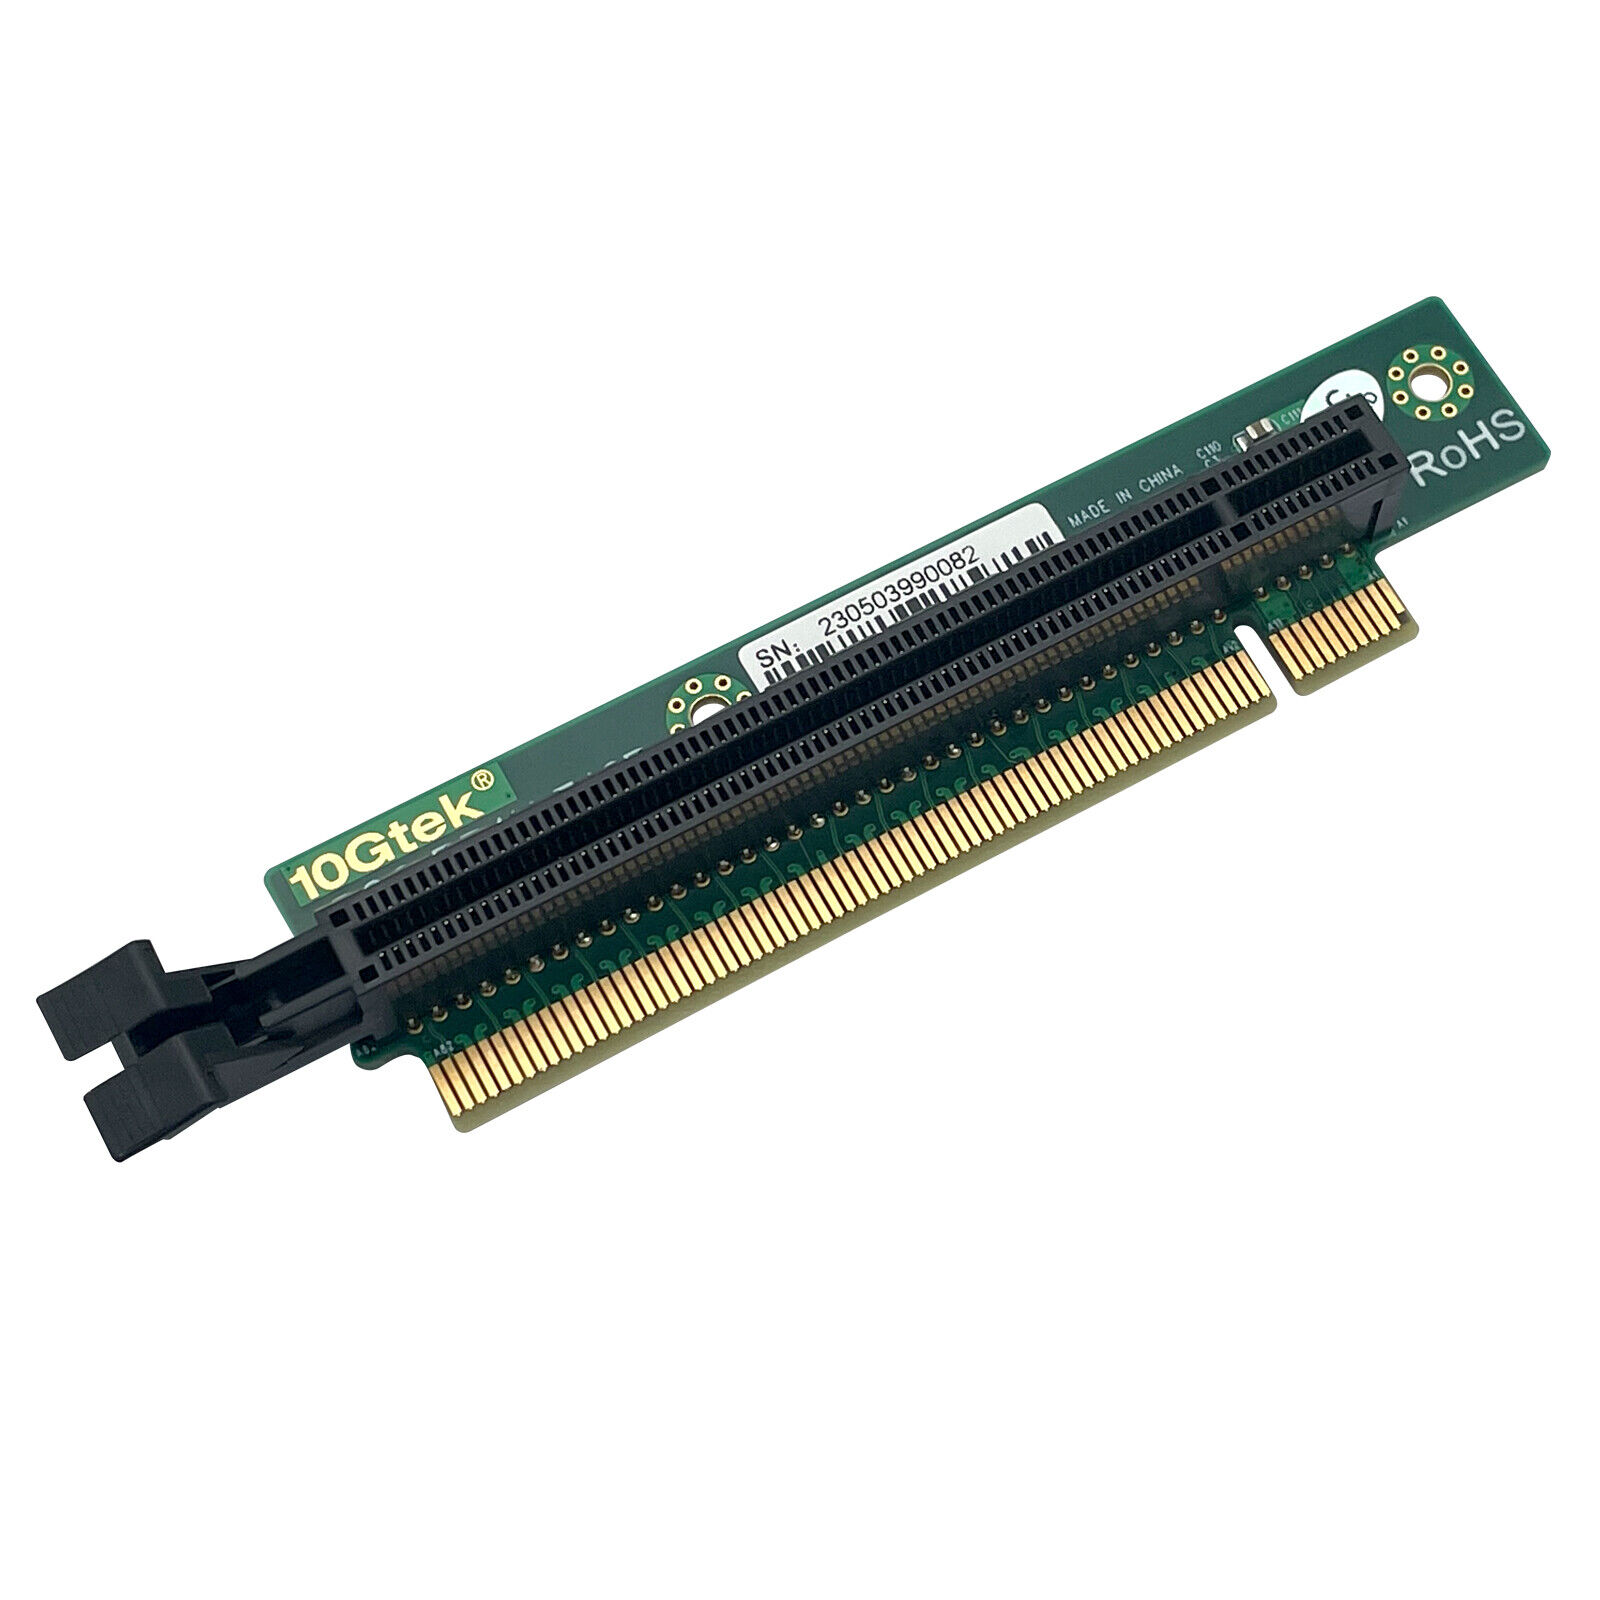 For Supermicro 1U Server Riser Card PCIe 16X-16X Adapter Card 90 Degree L-Angle